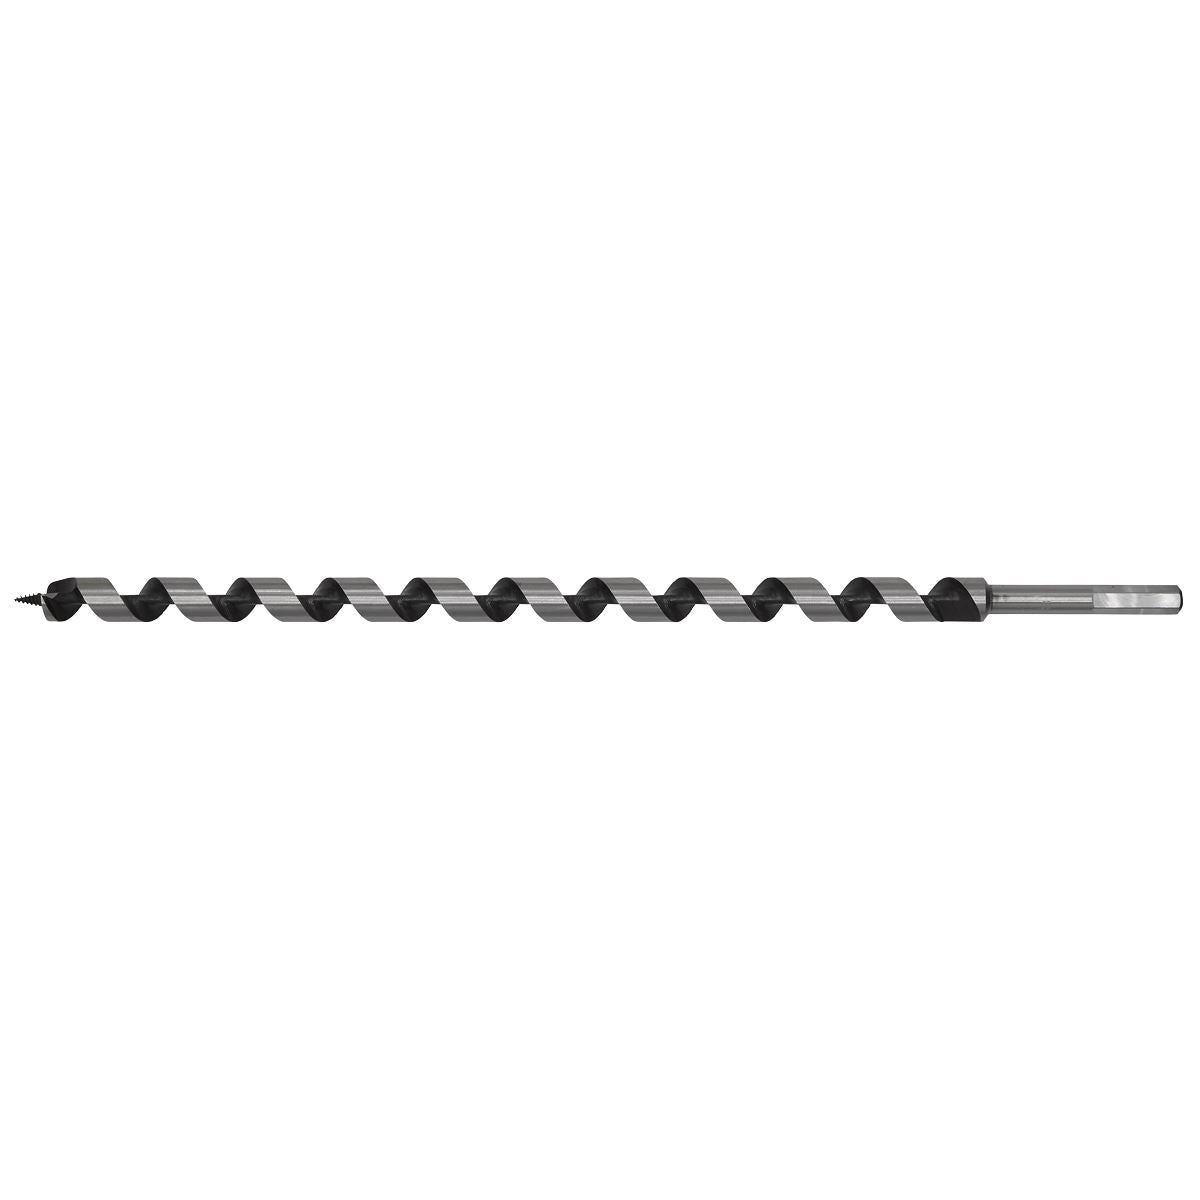 Worksafe by Sealey Auger Wood Drill Bit 18mm x 460mm